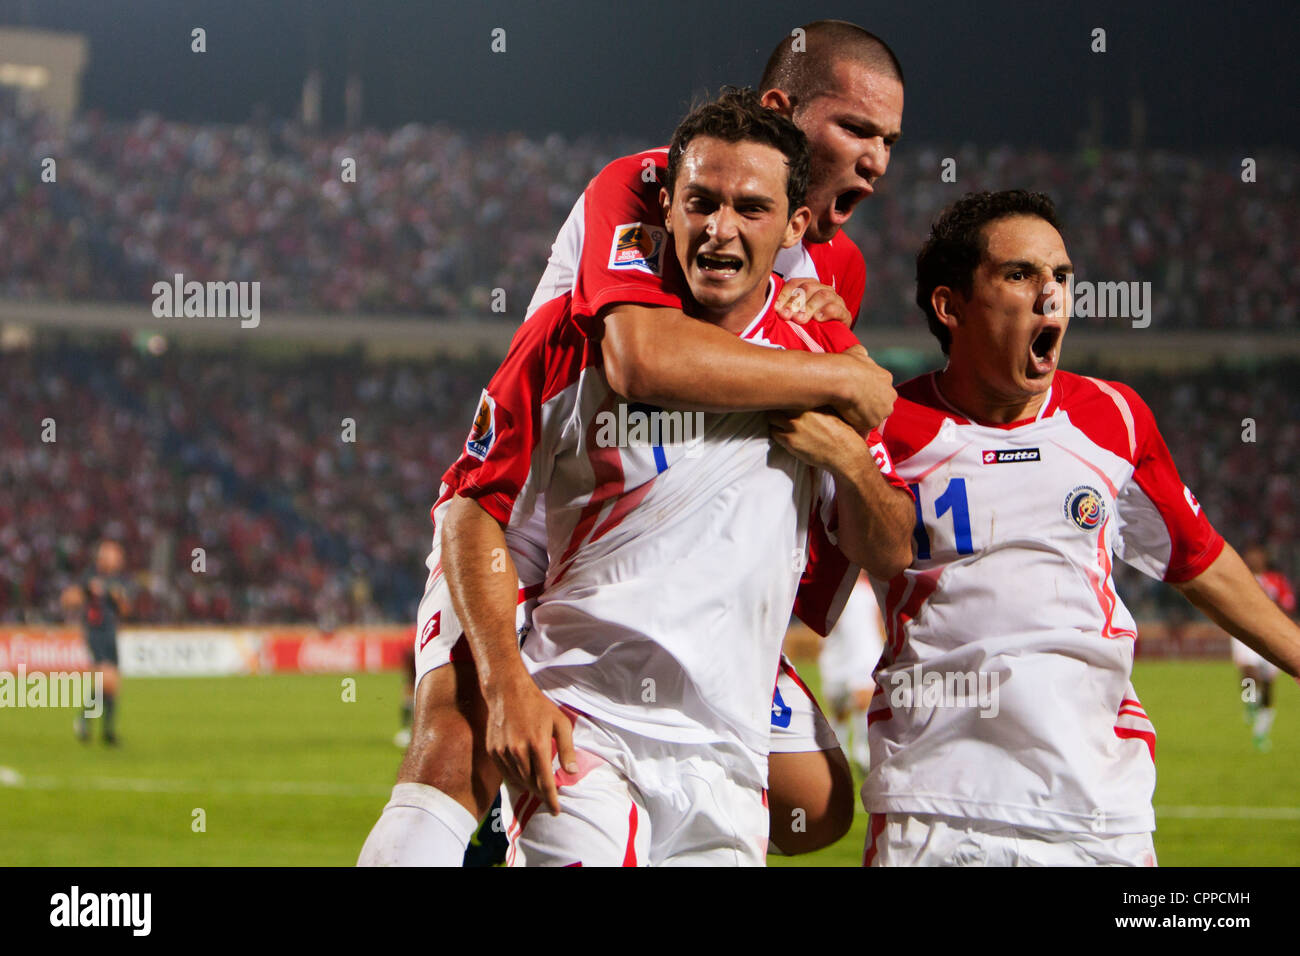 Costa Rica players celebrate after a goal against Egypt during a FIFA U-20 World Cup round of 16 soccer match. Stock Photo